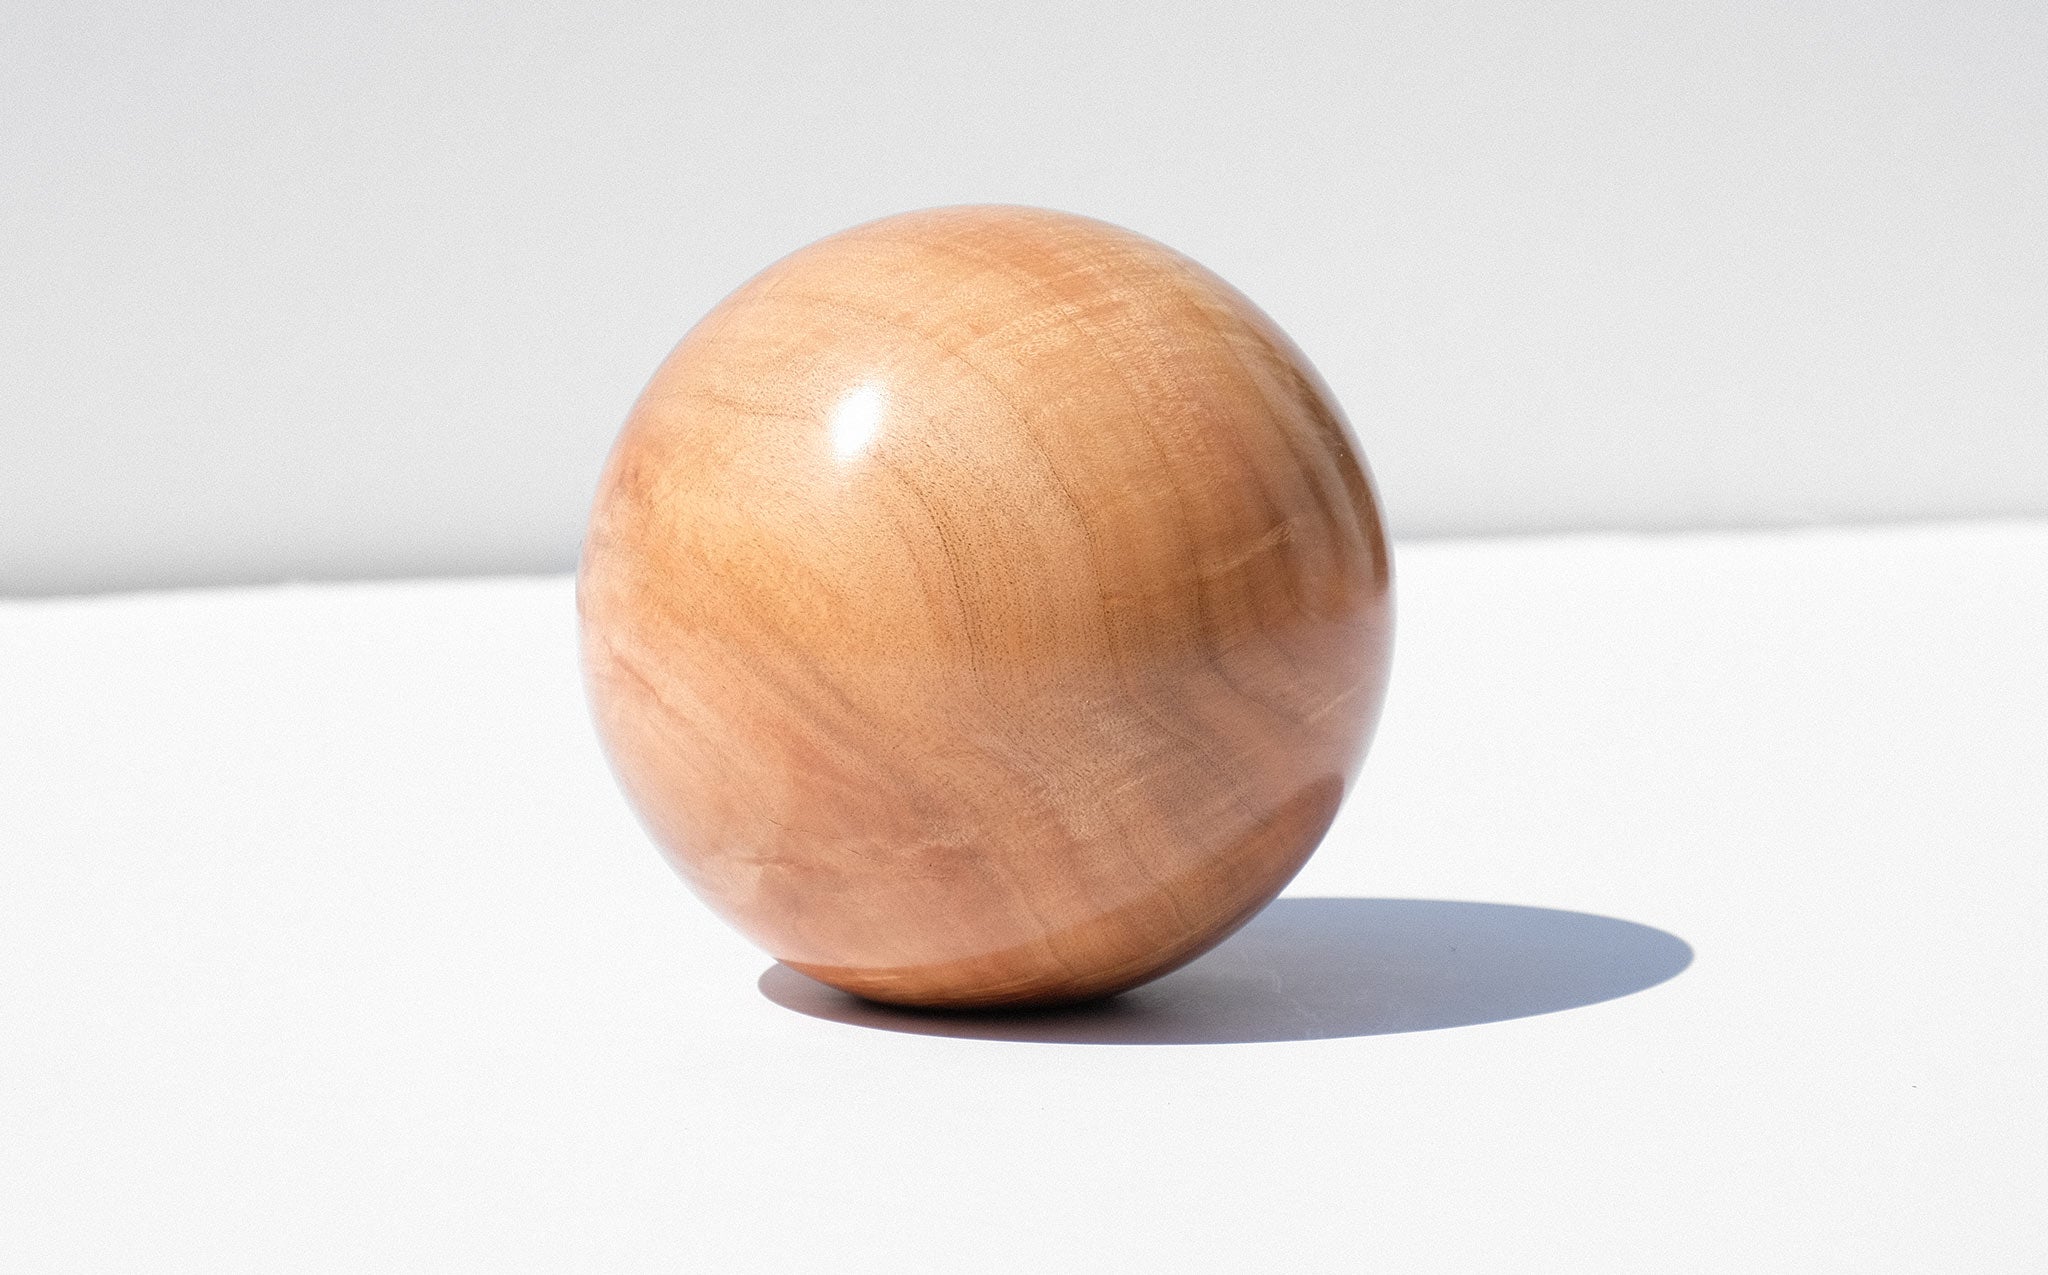 Bruce Perlmutter Hand Lathed Maple Orb